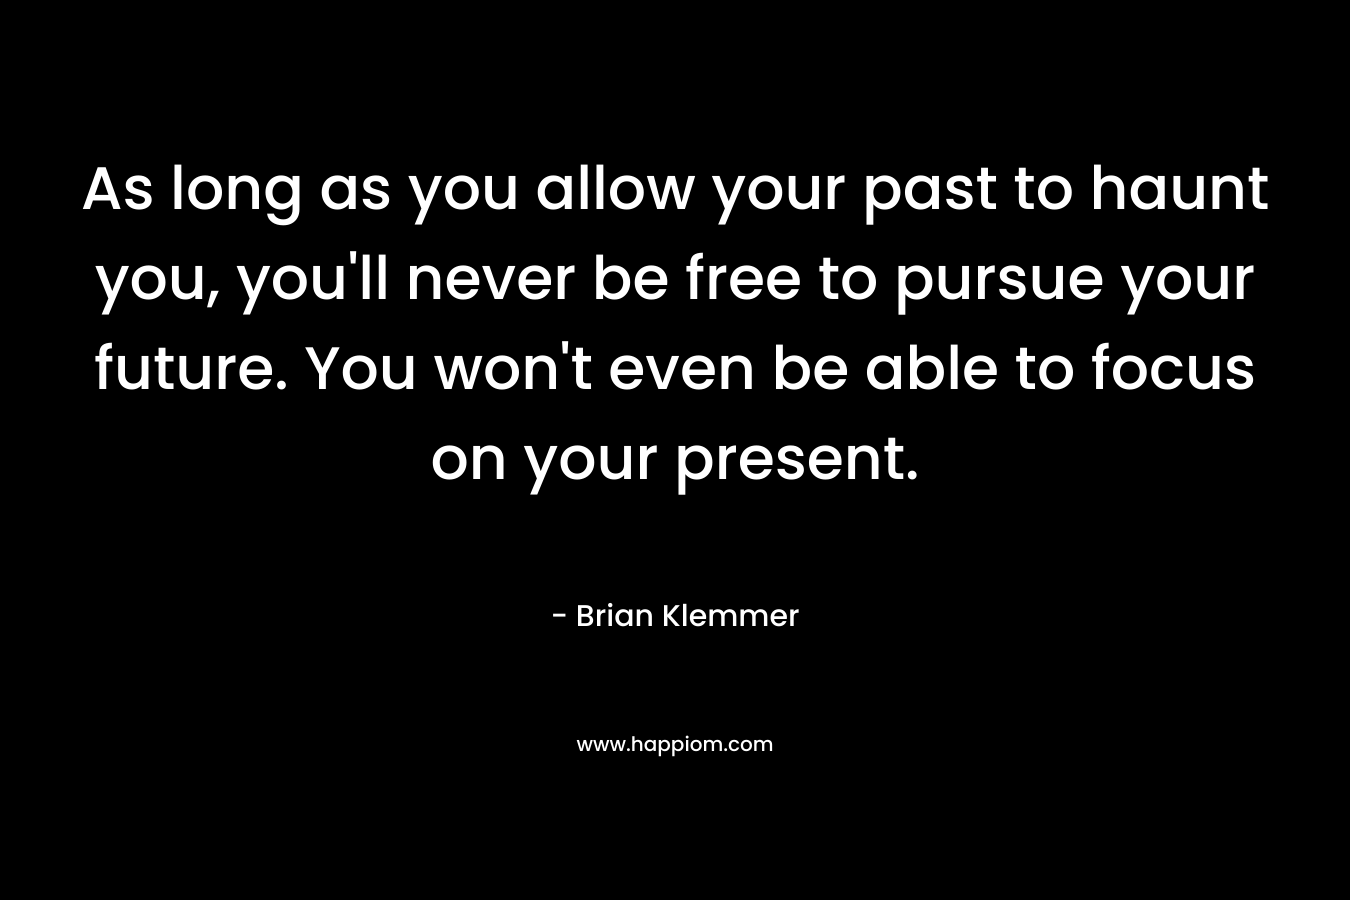 As long as you allow your past to haunt you, you’ll never be free to pursue your future. You won’t even be able to focus on your present. – Brian Klemmer